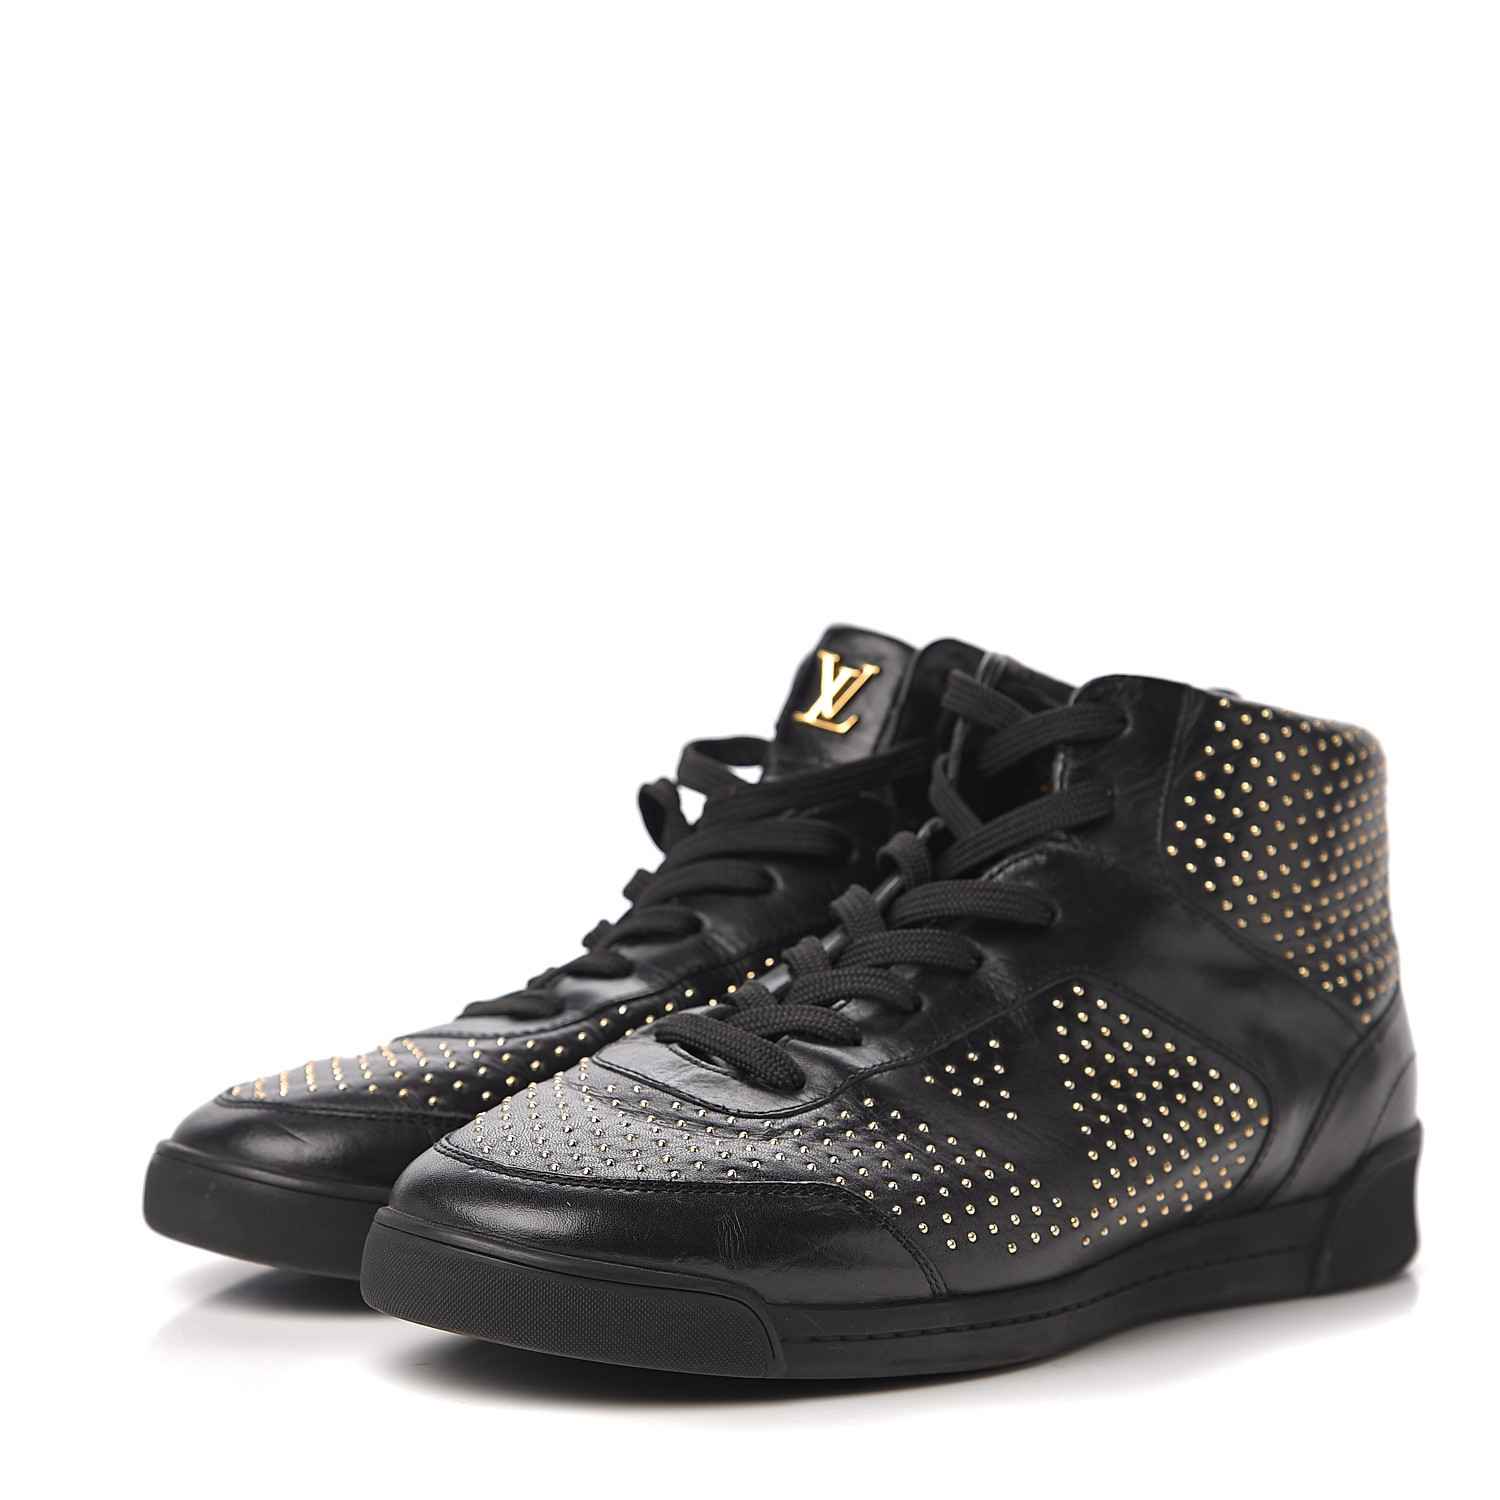 LOUIS VUITTON Studded High Top Sneakers 37 Black 538713